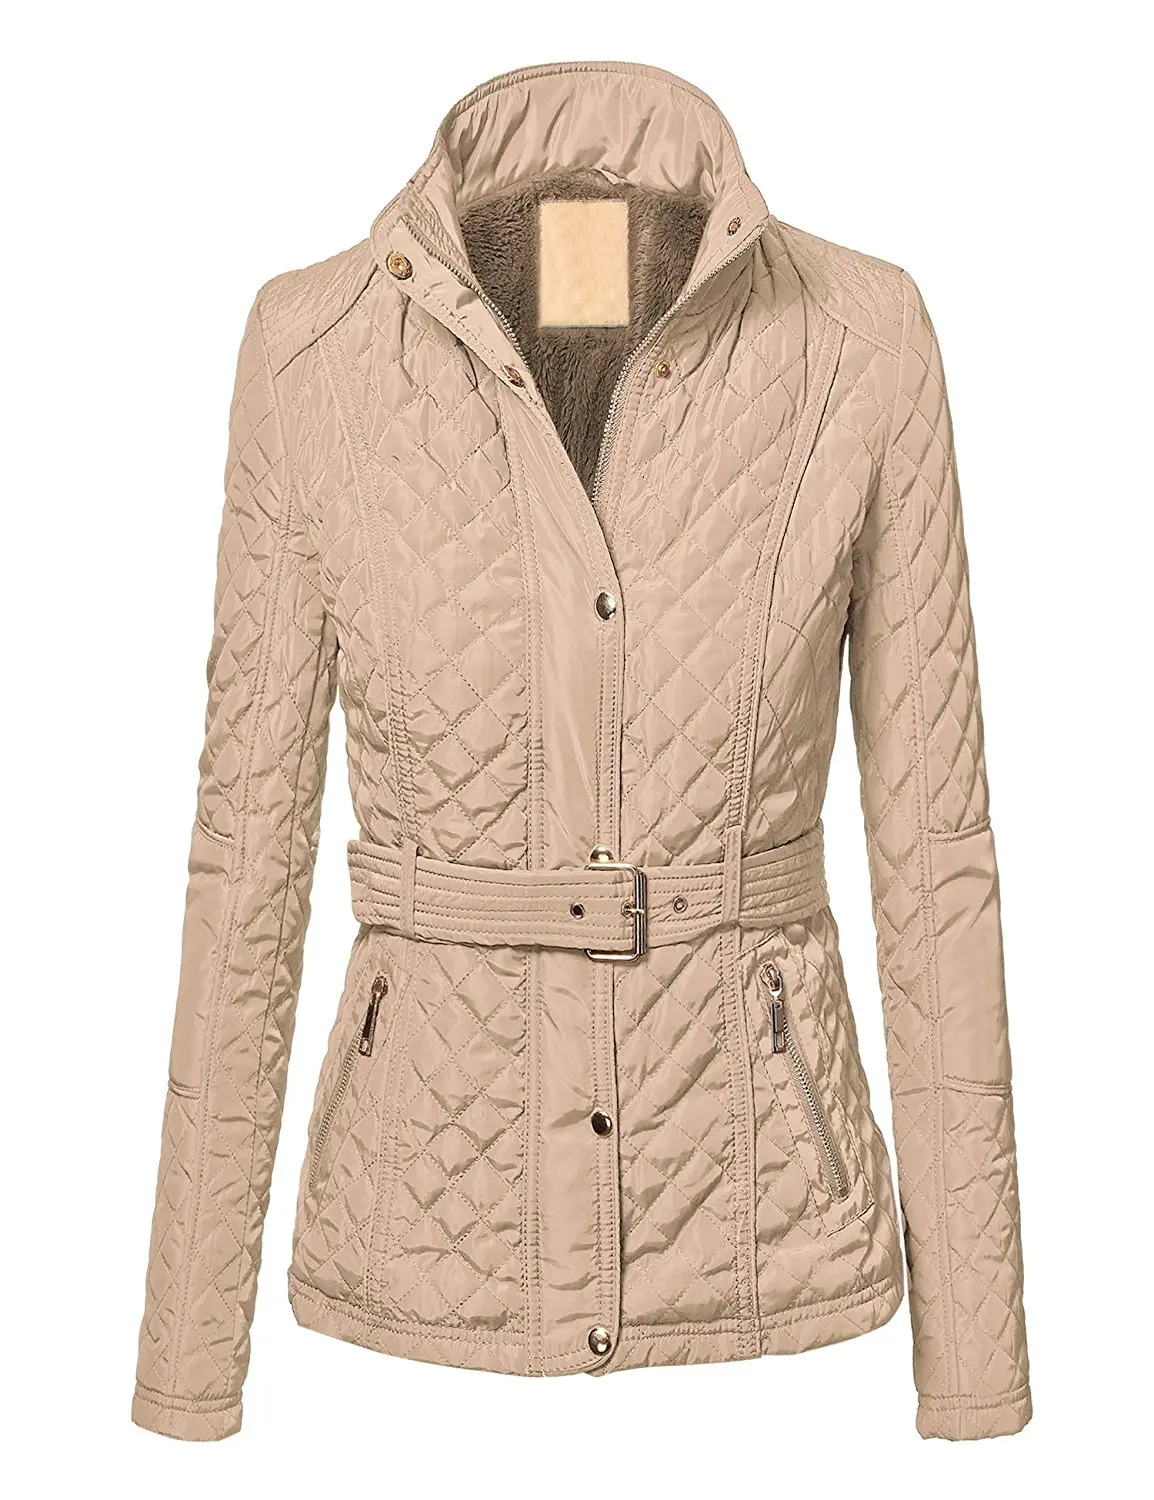 Cheap Cream Quilted Jacket, find Cream Quilted Jacket deals on line at ...